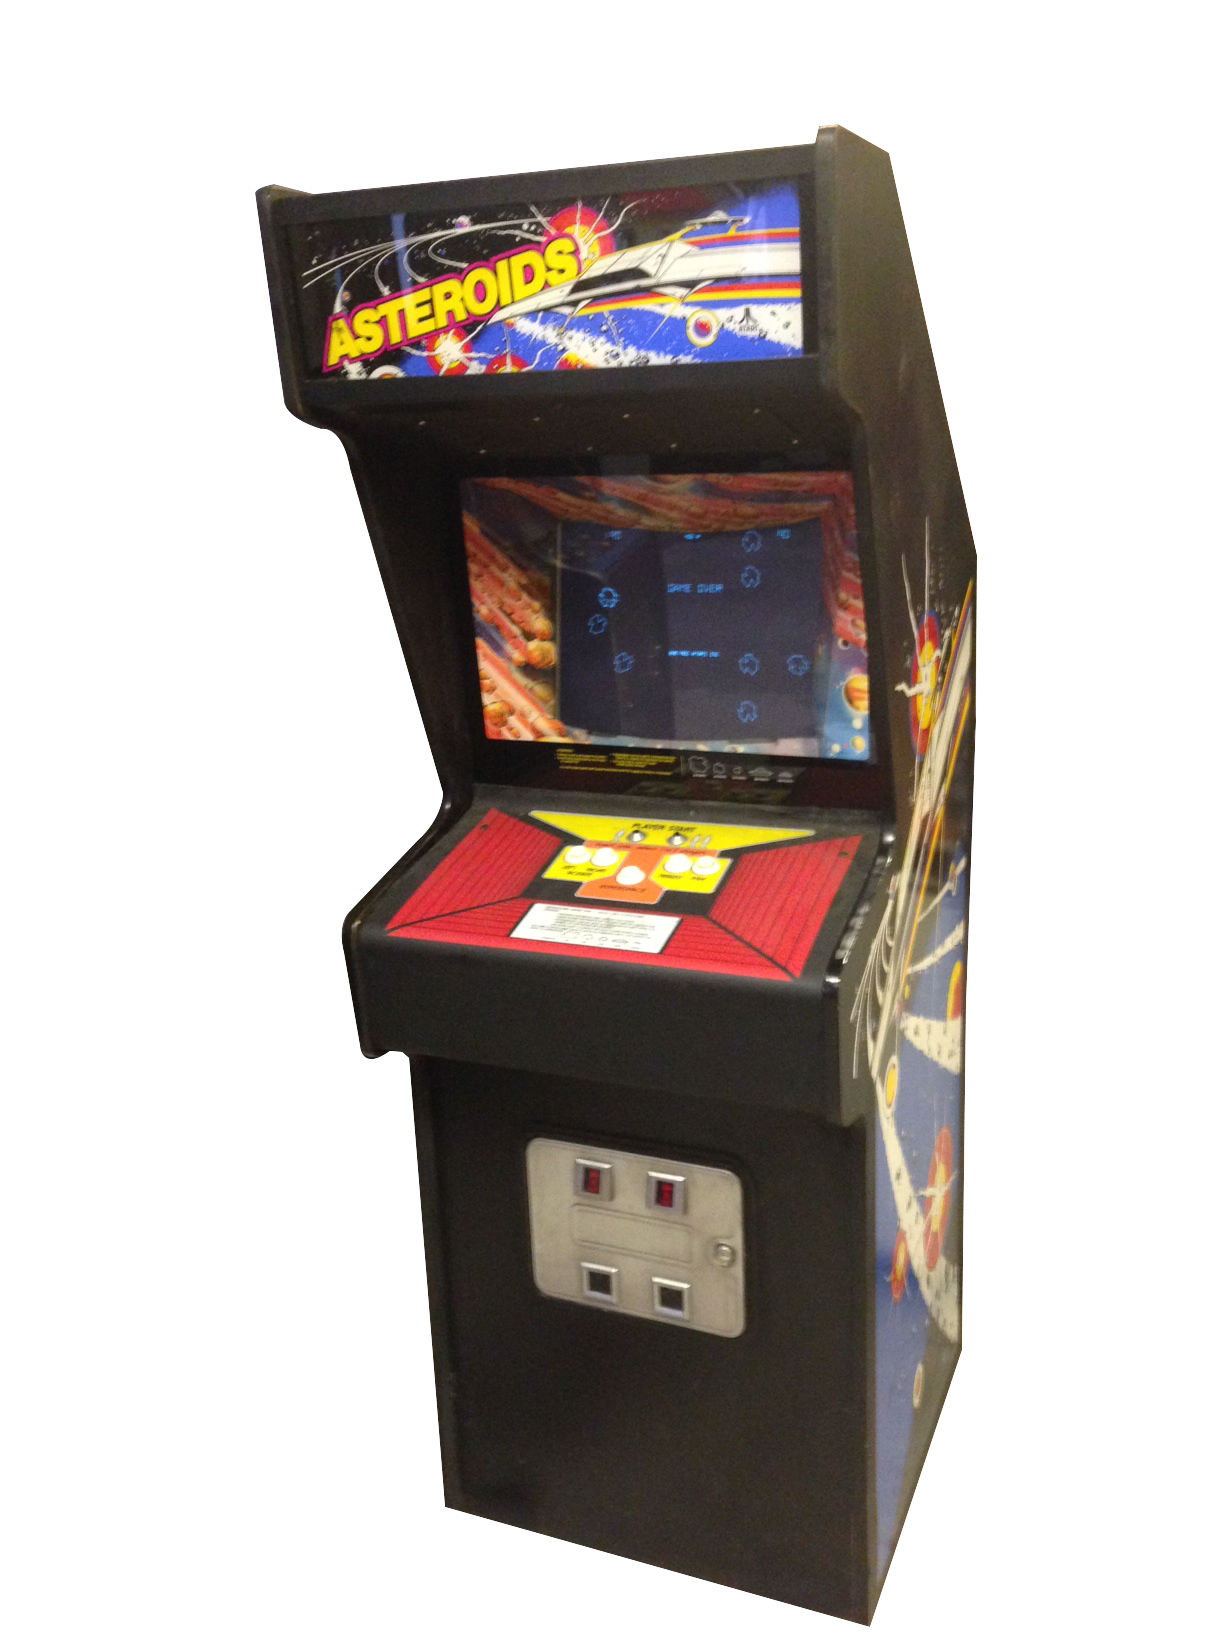 Asteroids Arcade Machine For Hire Hire Arcade Games Amh Uk